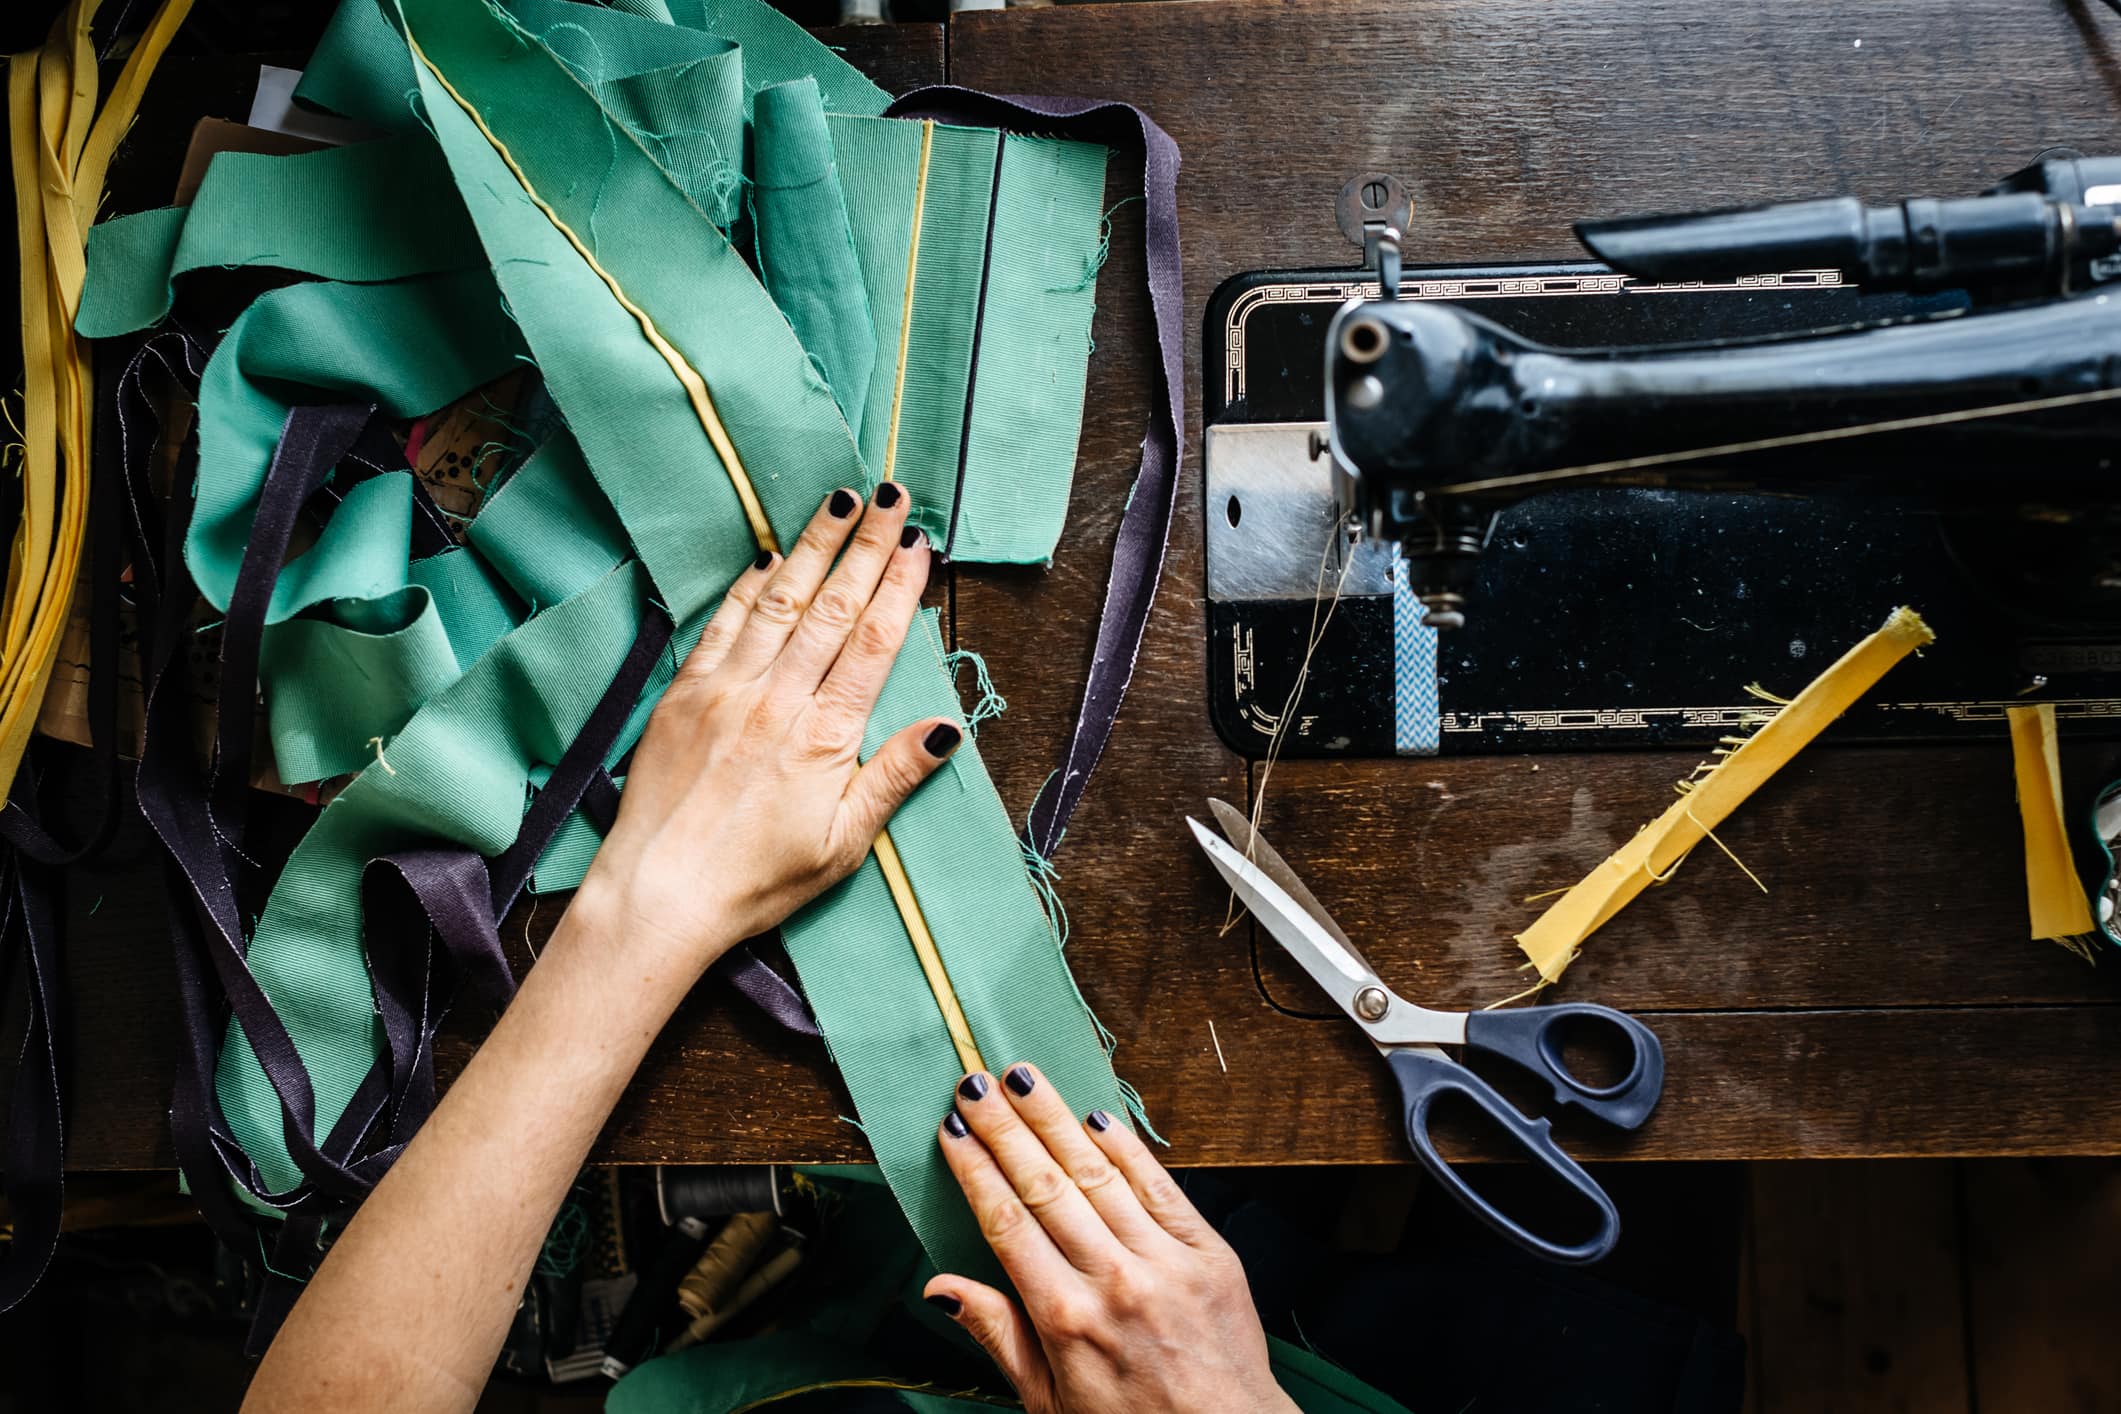 The Best Sewing Books For Beginners In 2019 - 